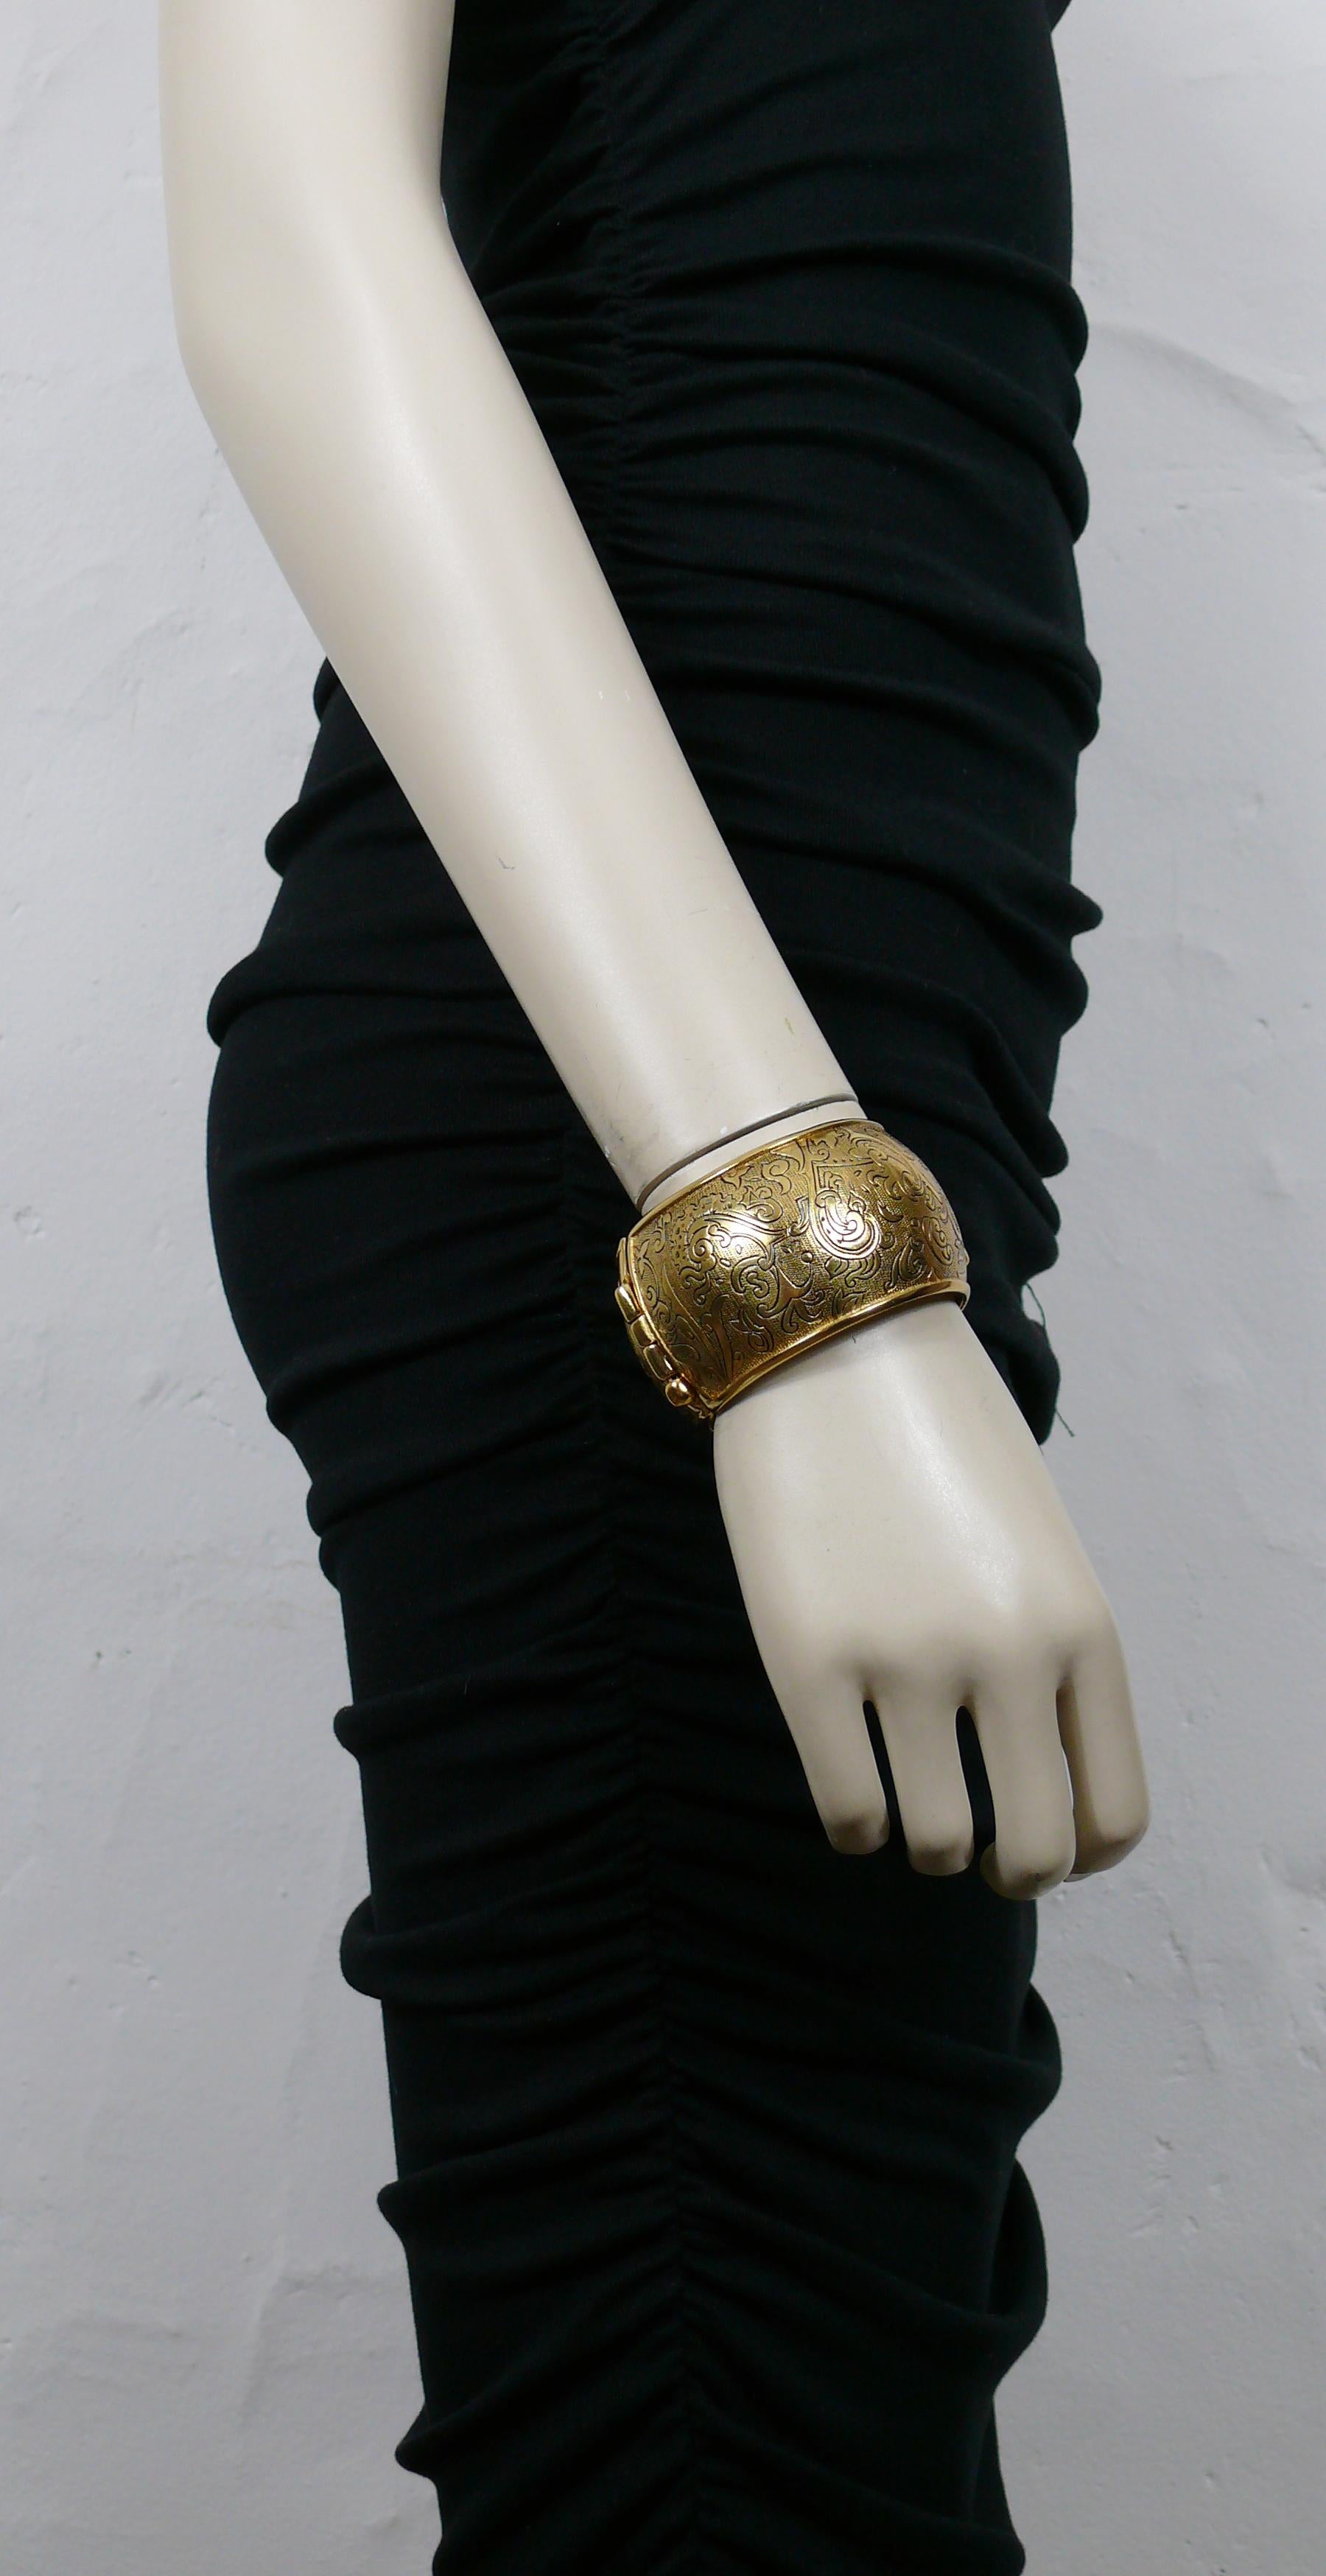 YVES SAINT LAURENT vintage gold tone cuff bracelet embossed with floral arabesques on a guilloche background.

Embossed YSL Made in France.

Indicative measurements : inner circumference approx. 17.59 cm (6.93 inches) / width approx. 4 cm (1.57